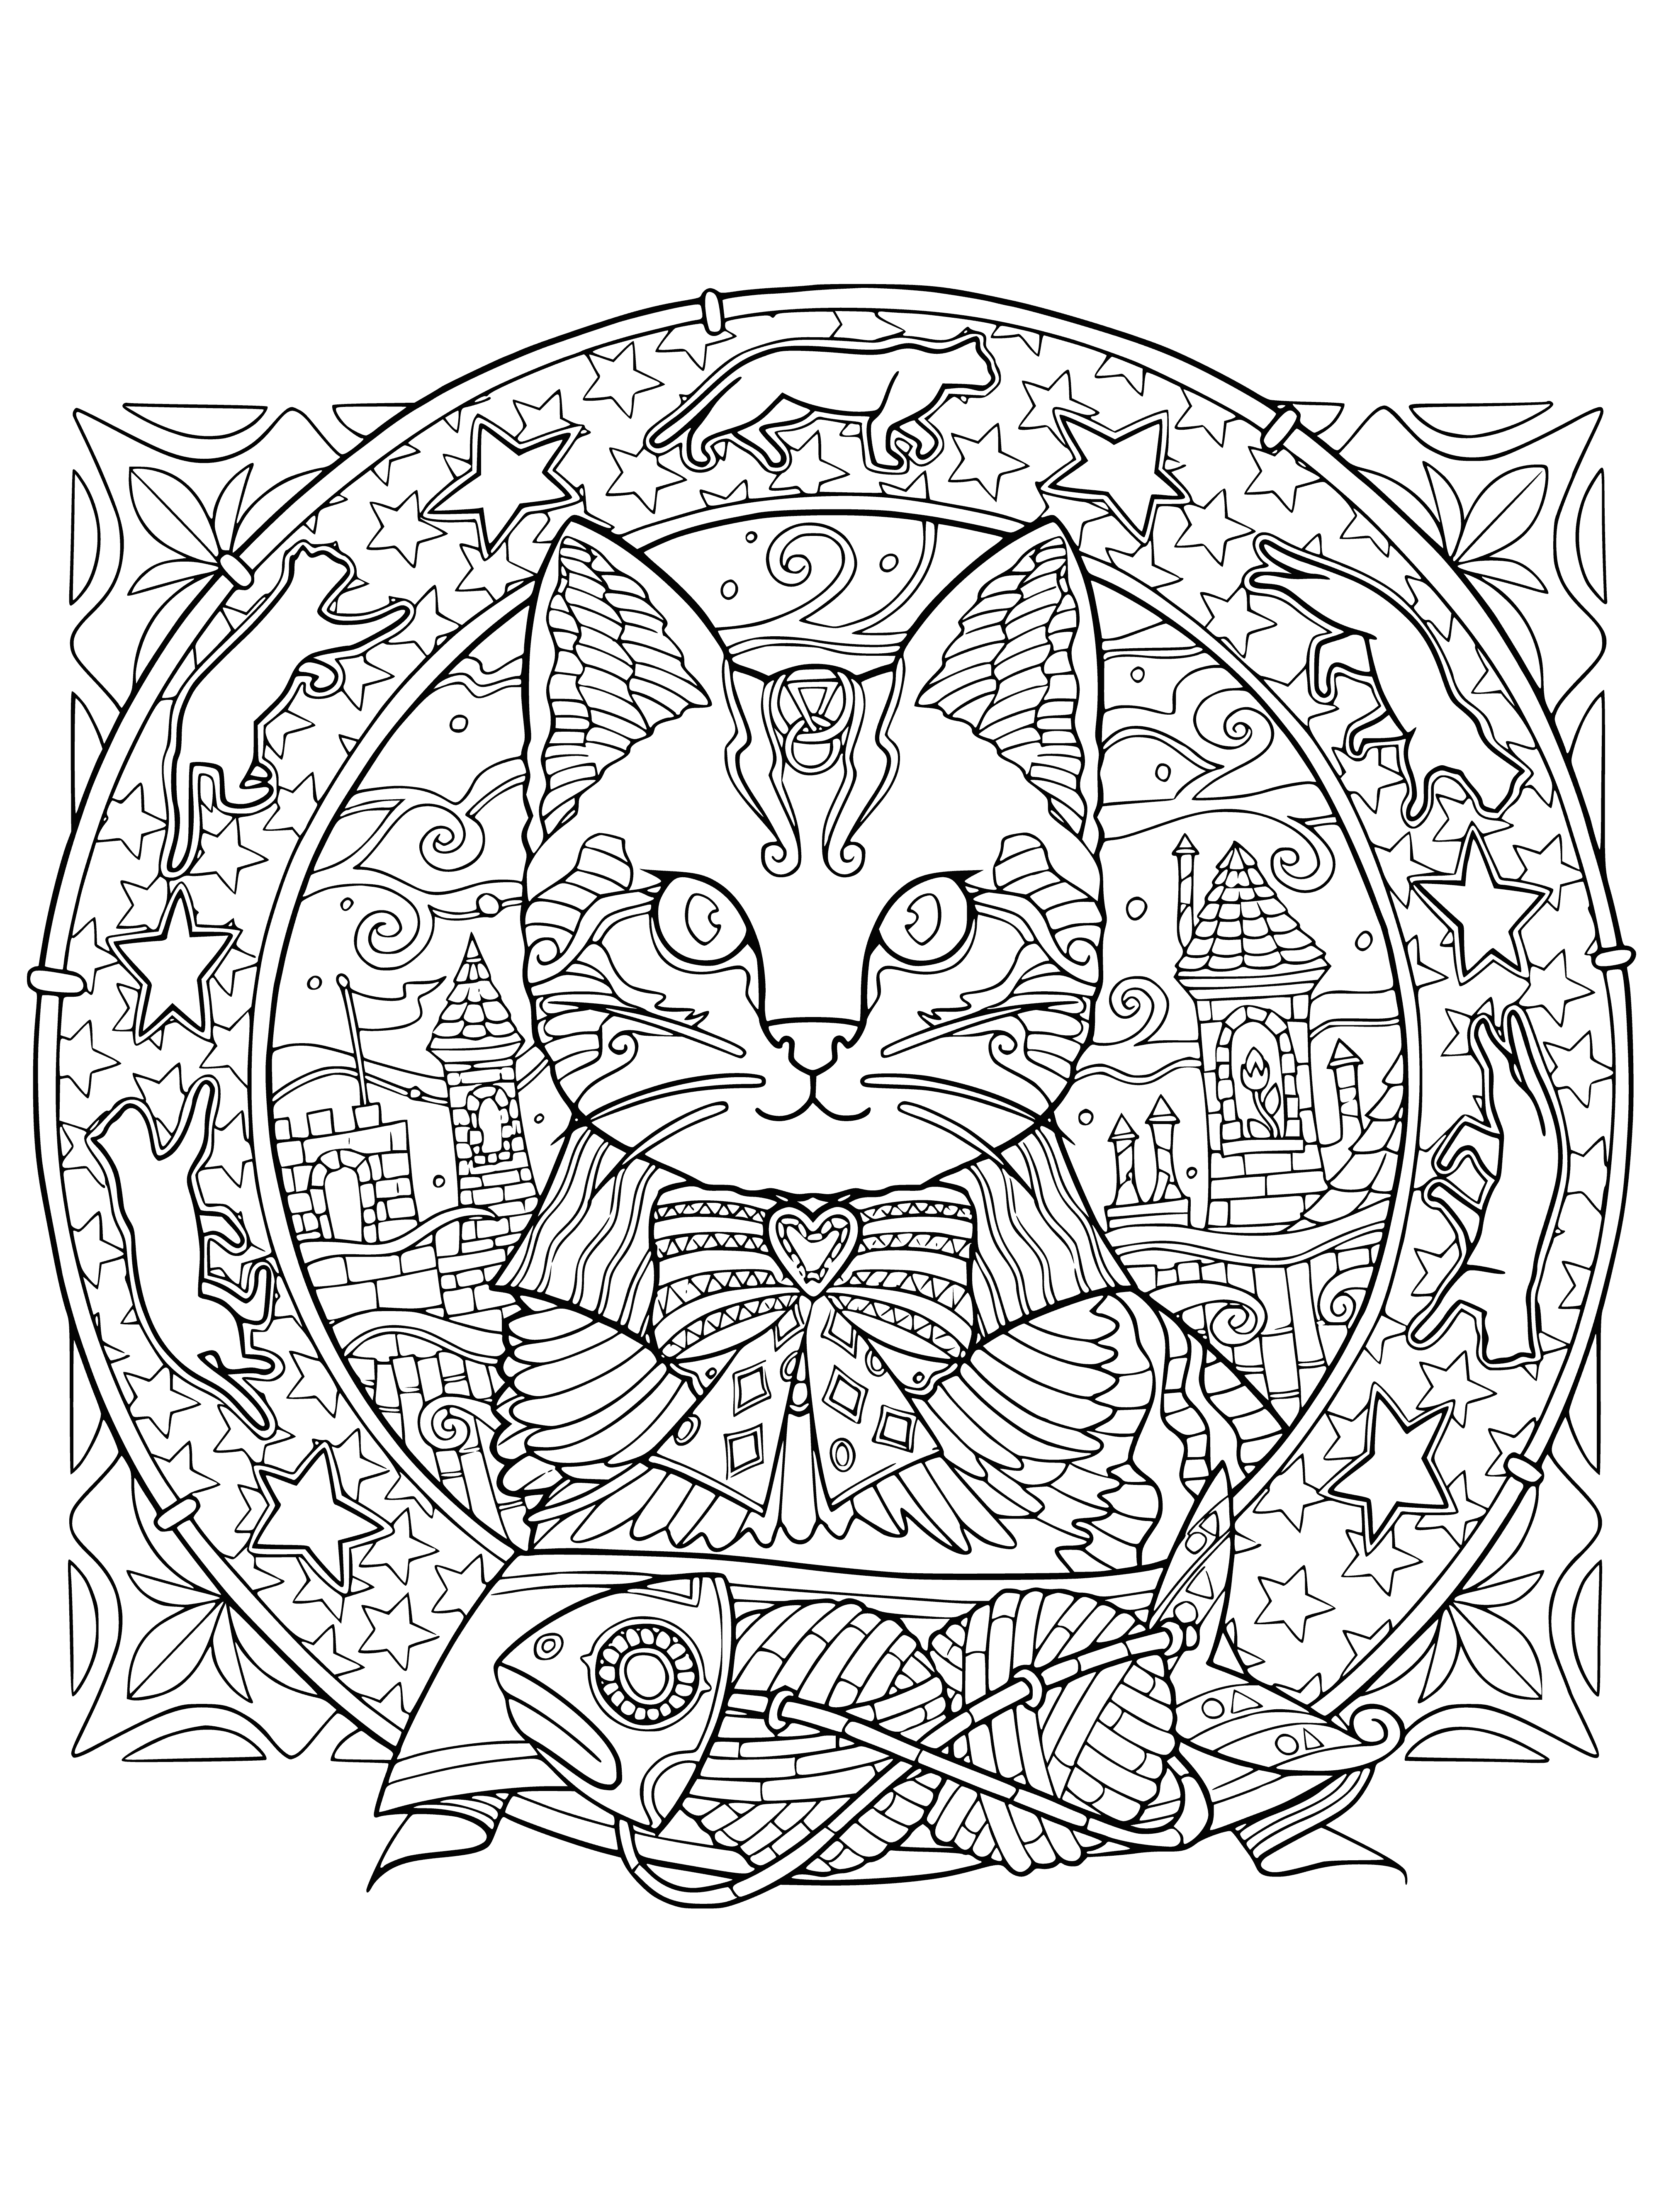 coloring page: A mandala with bright & vibrant colors of flowers & plant life, featuring two cats in its center, creating a calming atmosphere.